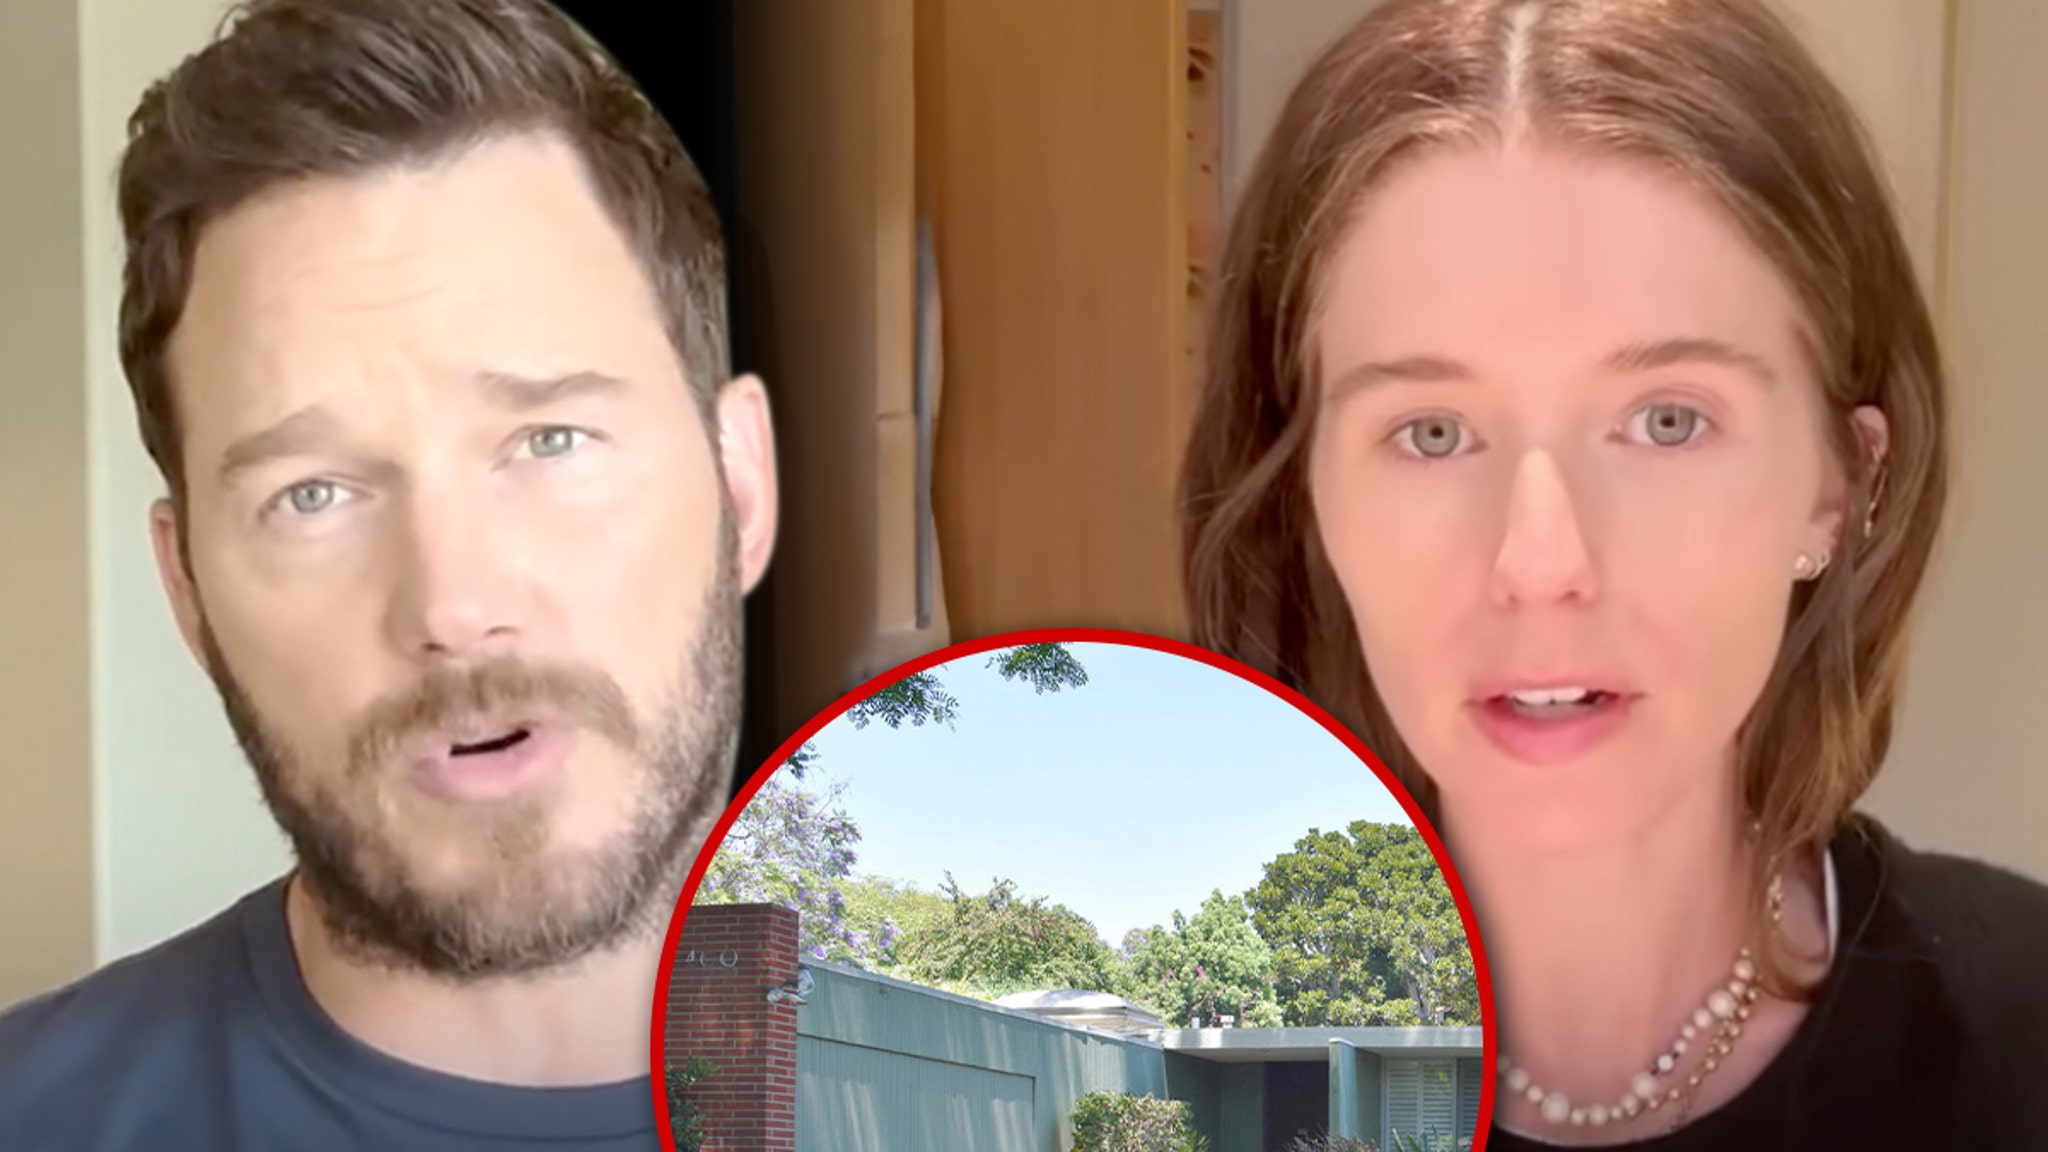 Chris Pratt leveling iconic Los Angeles. Home Angers, cool architect family with that